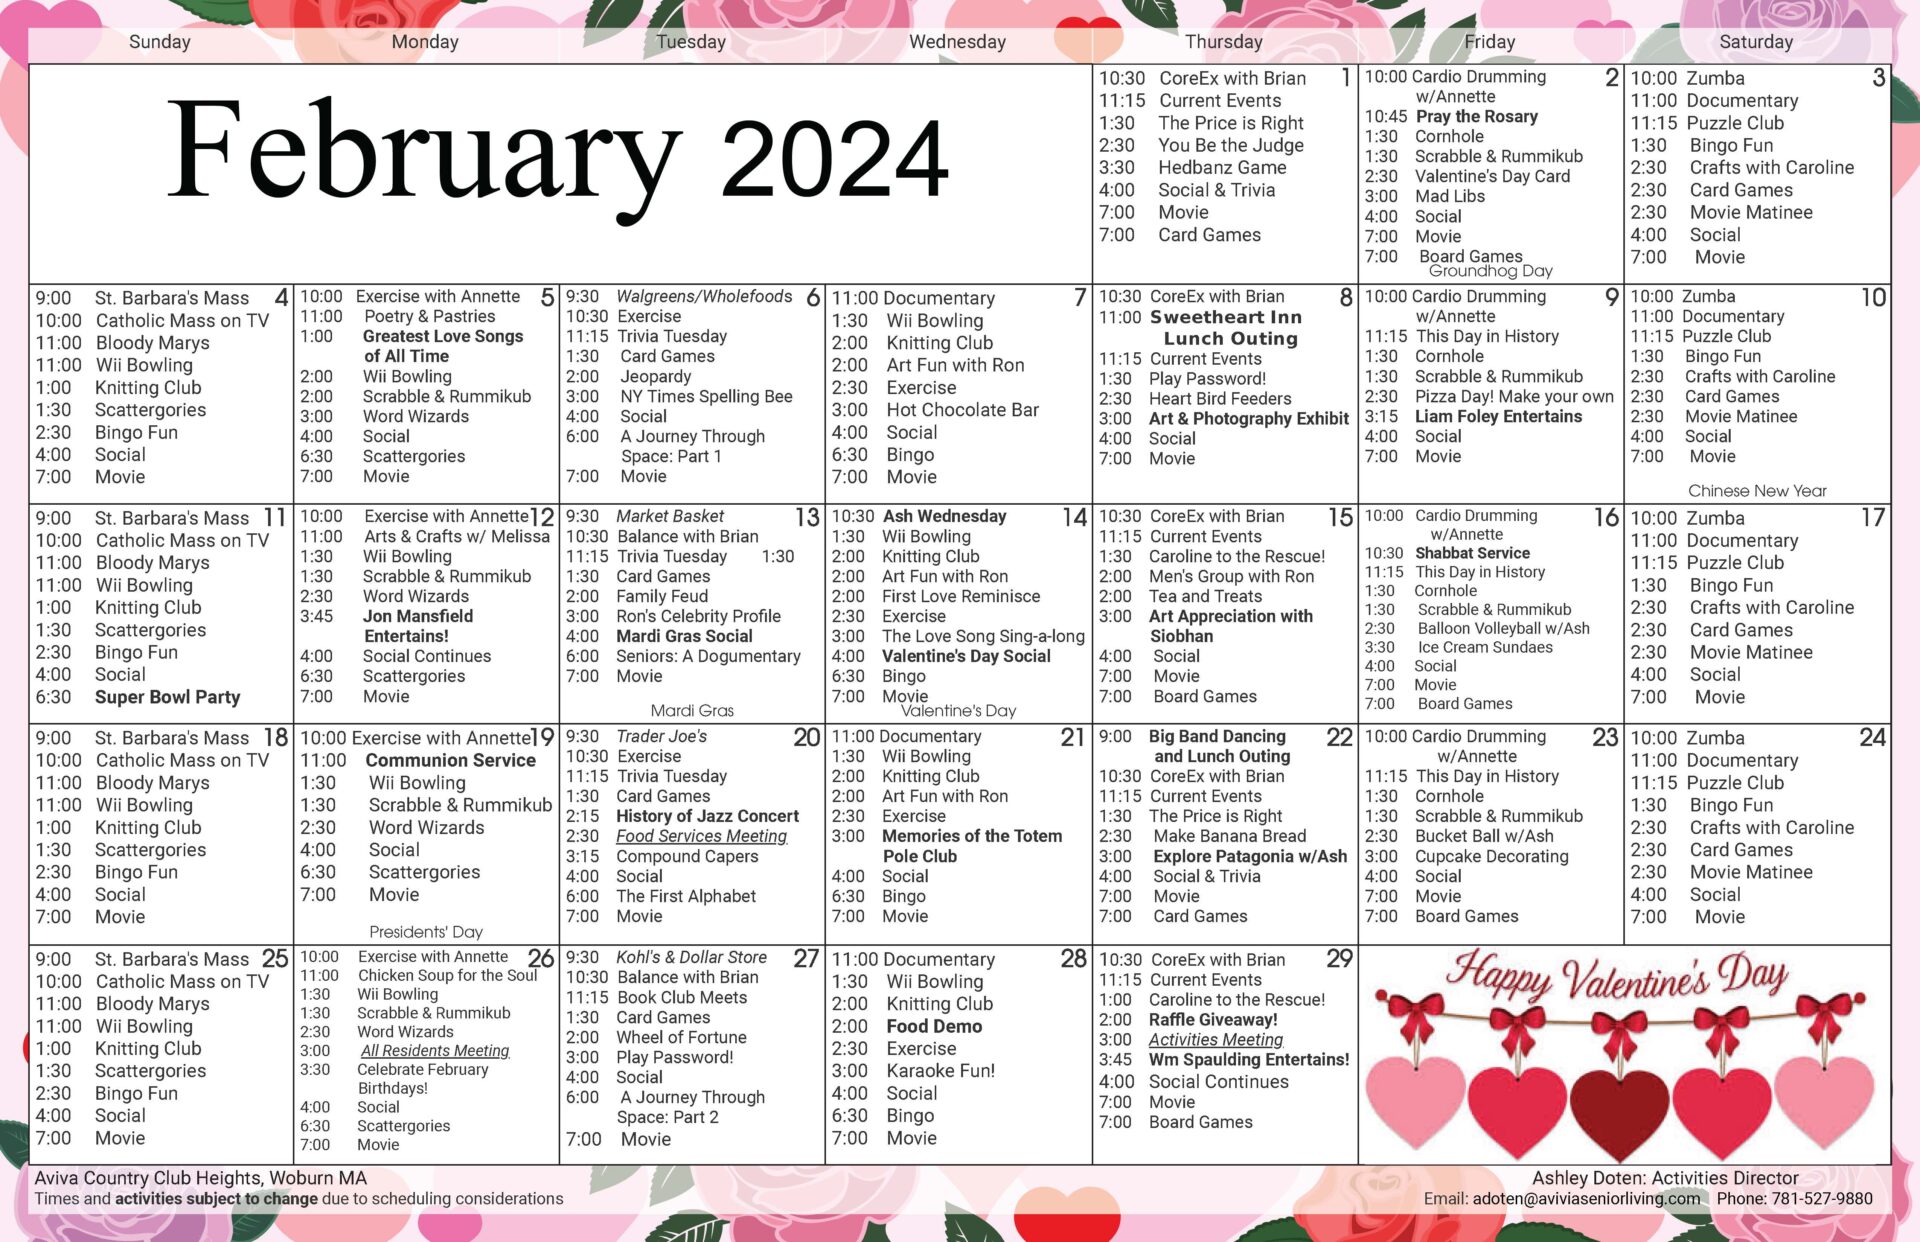 Aviva Country Club Heights Assisted Living February 2023 Event Calendar